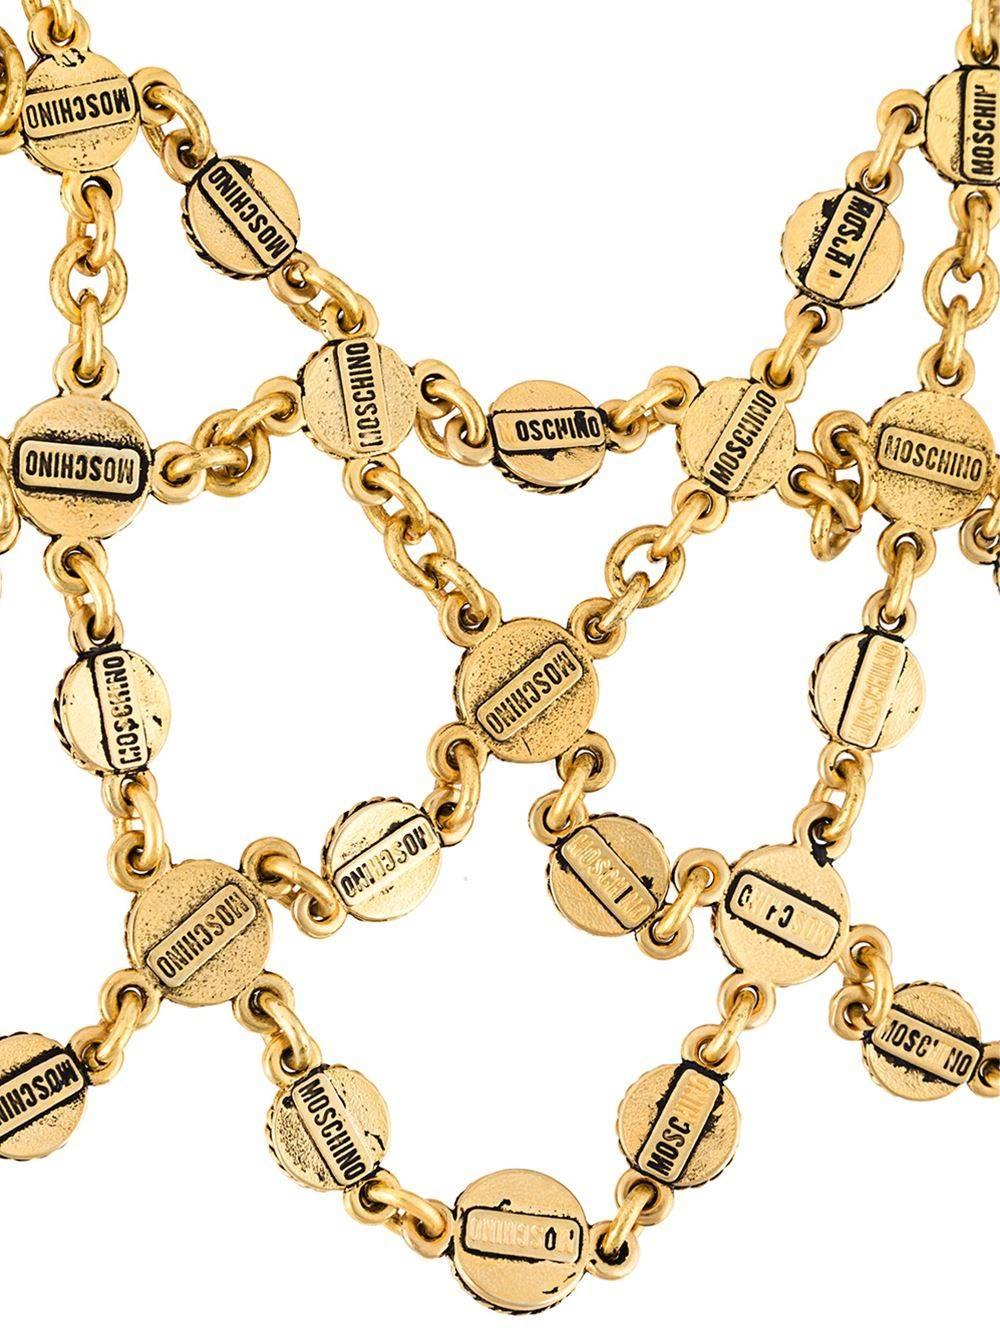 A great, fun and collectable Moschino vintage couture necklace made by Correani for Moschino, c.1980. Made of gilt metal. Excellent vintage condition. Size: Circumference: 48 cm - 19 in, width: 11 cm - 4 1/3 in.